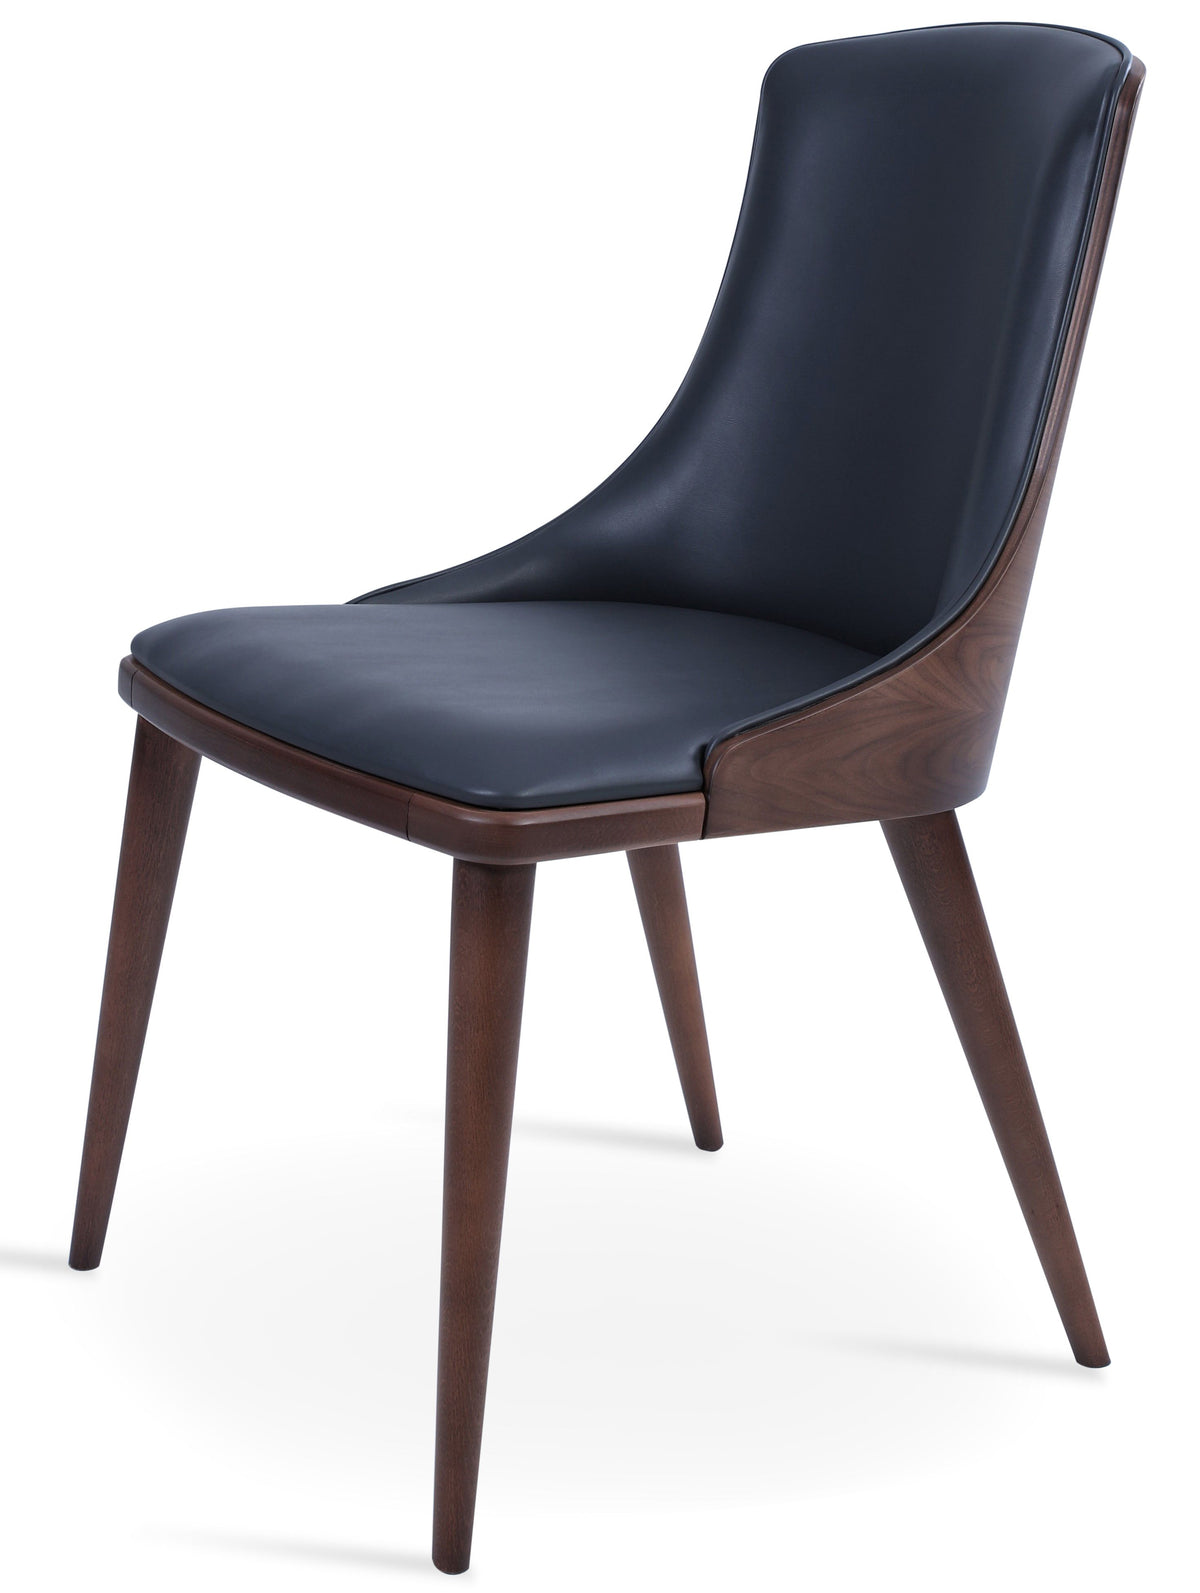 Romano-W Dining Chair by Soho Concept